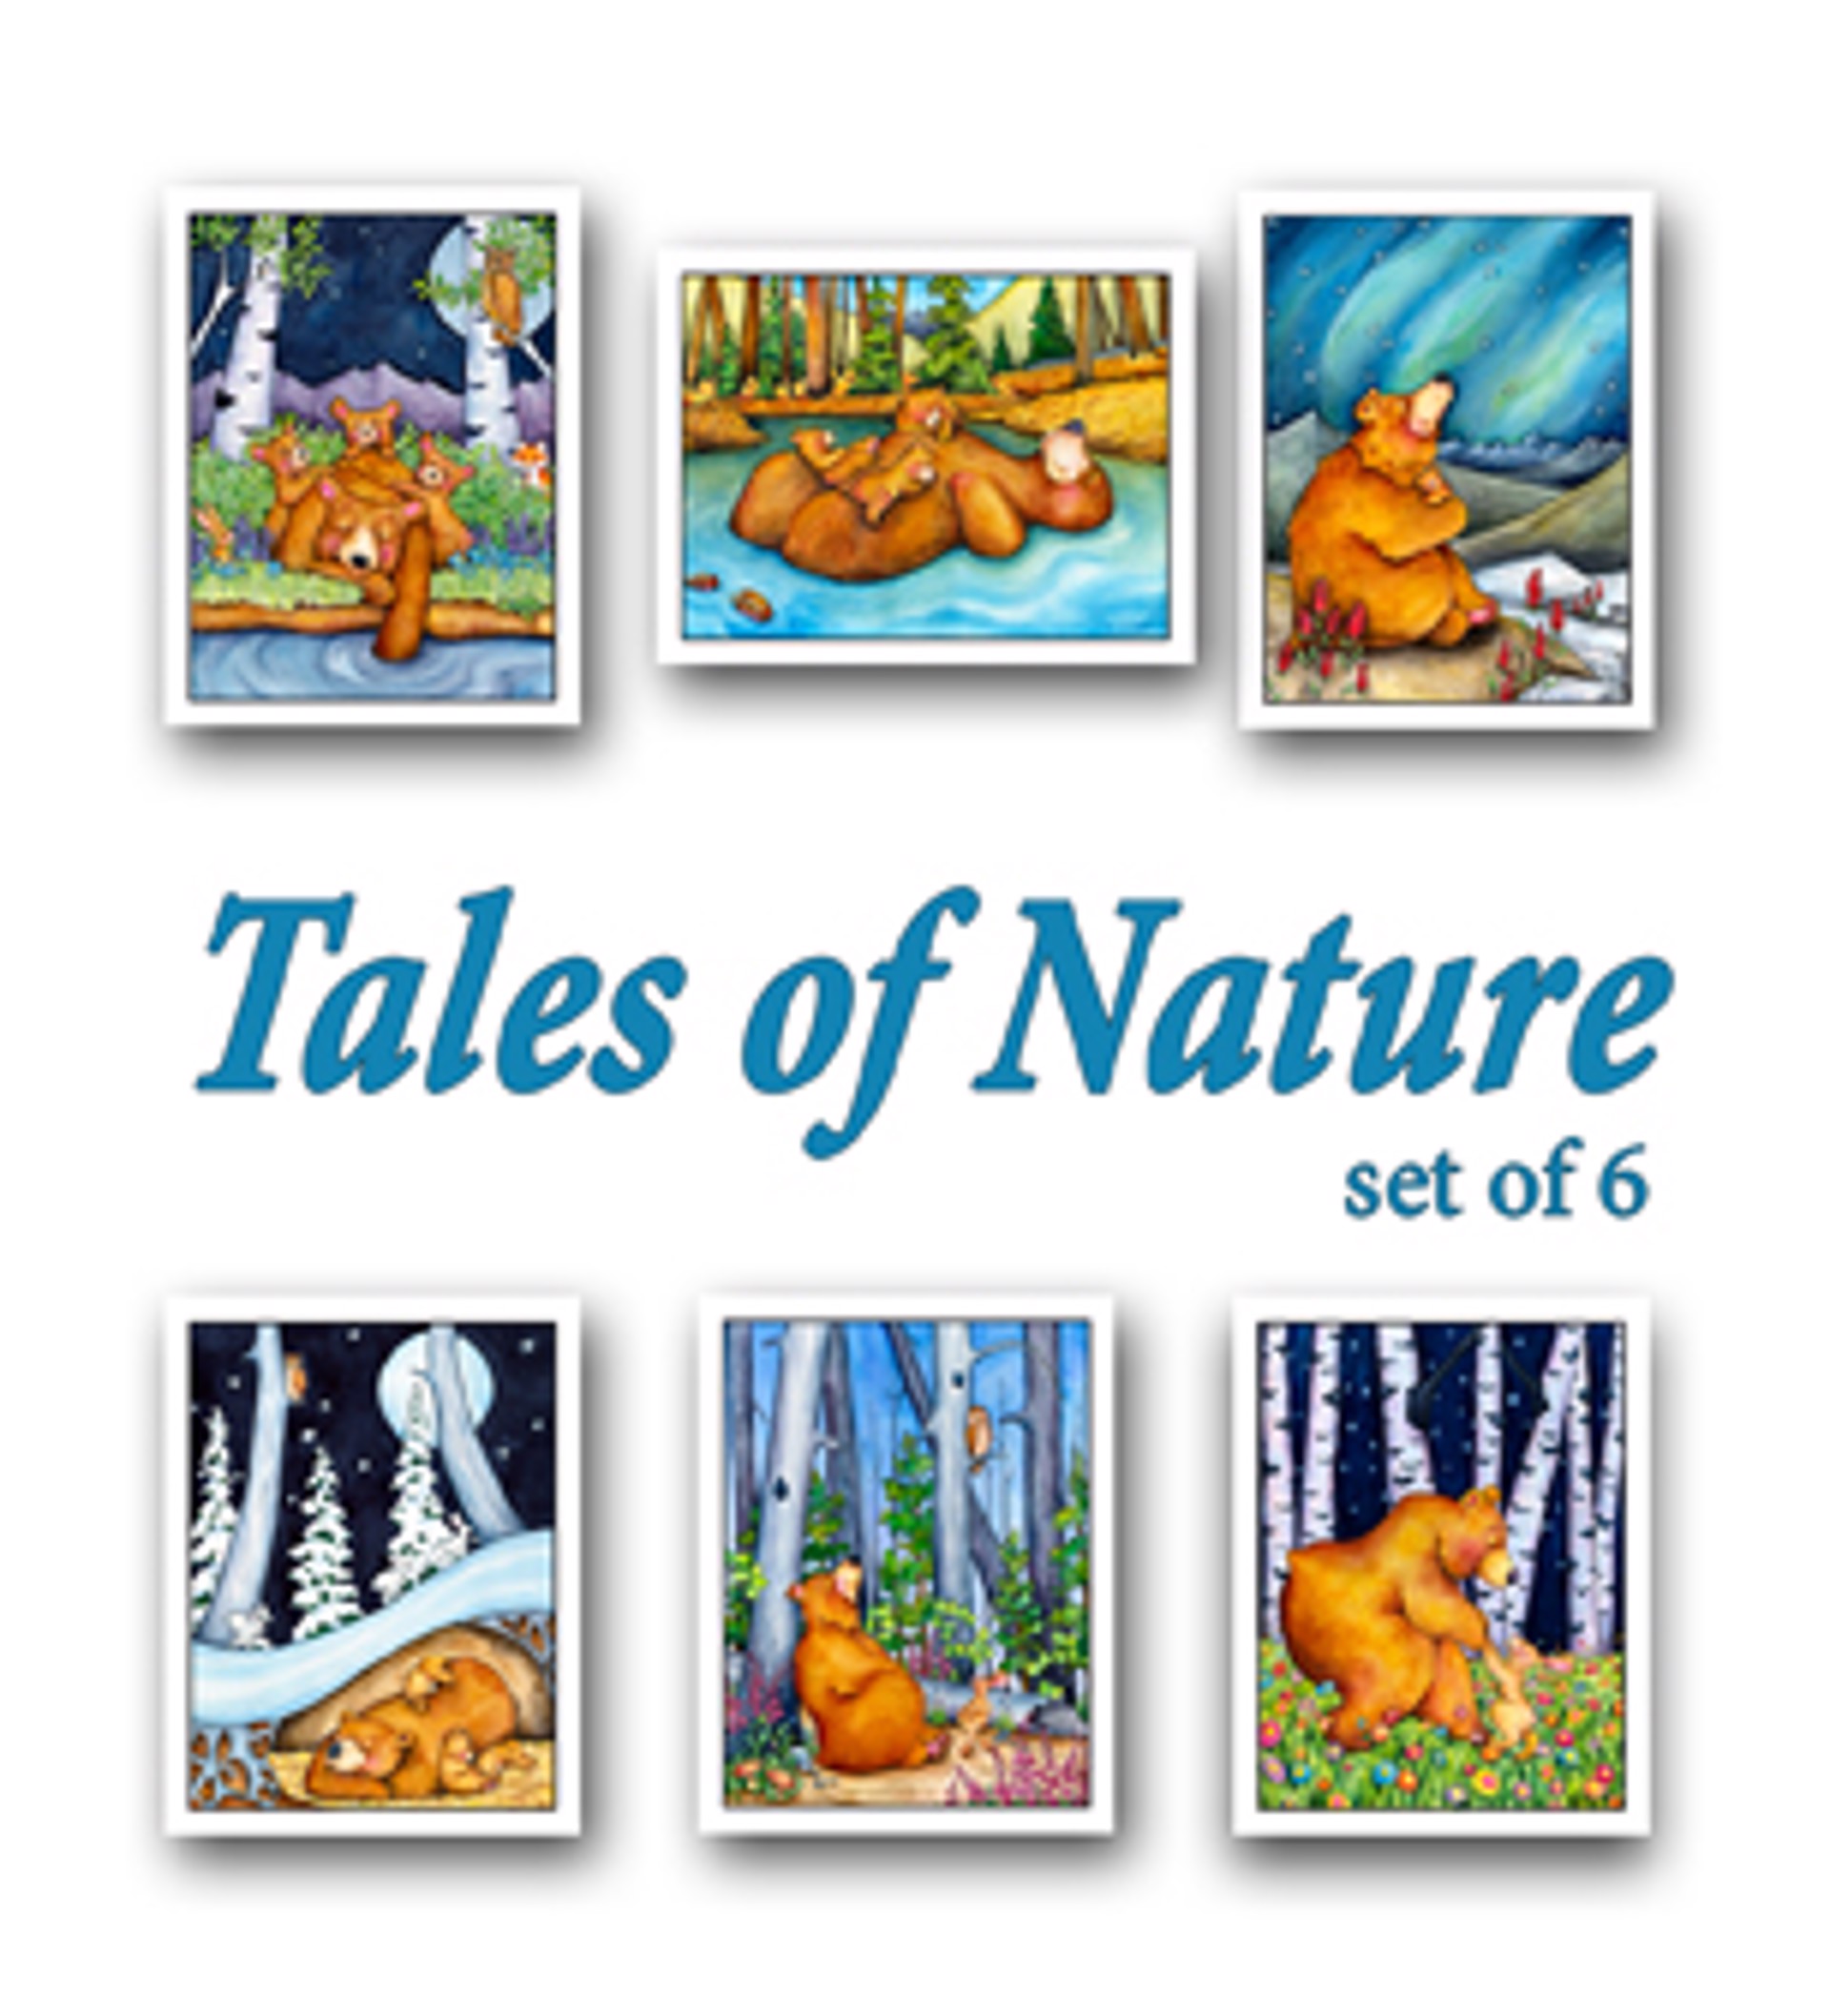 Tales of Nature Art Card Pack by Karen Savory